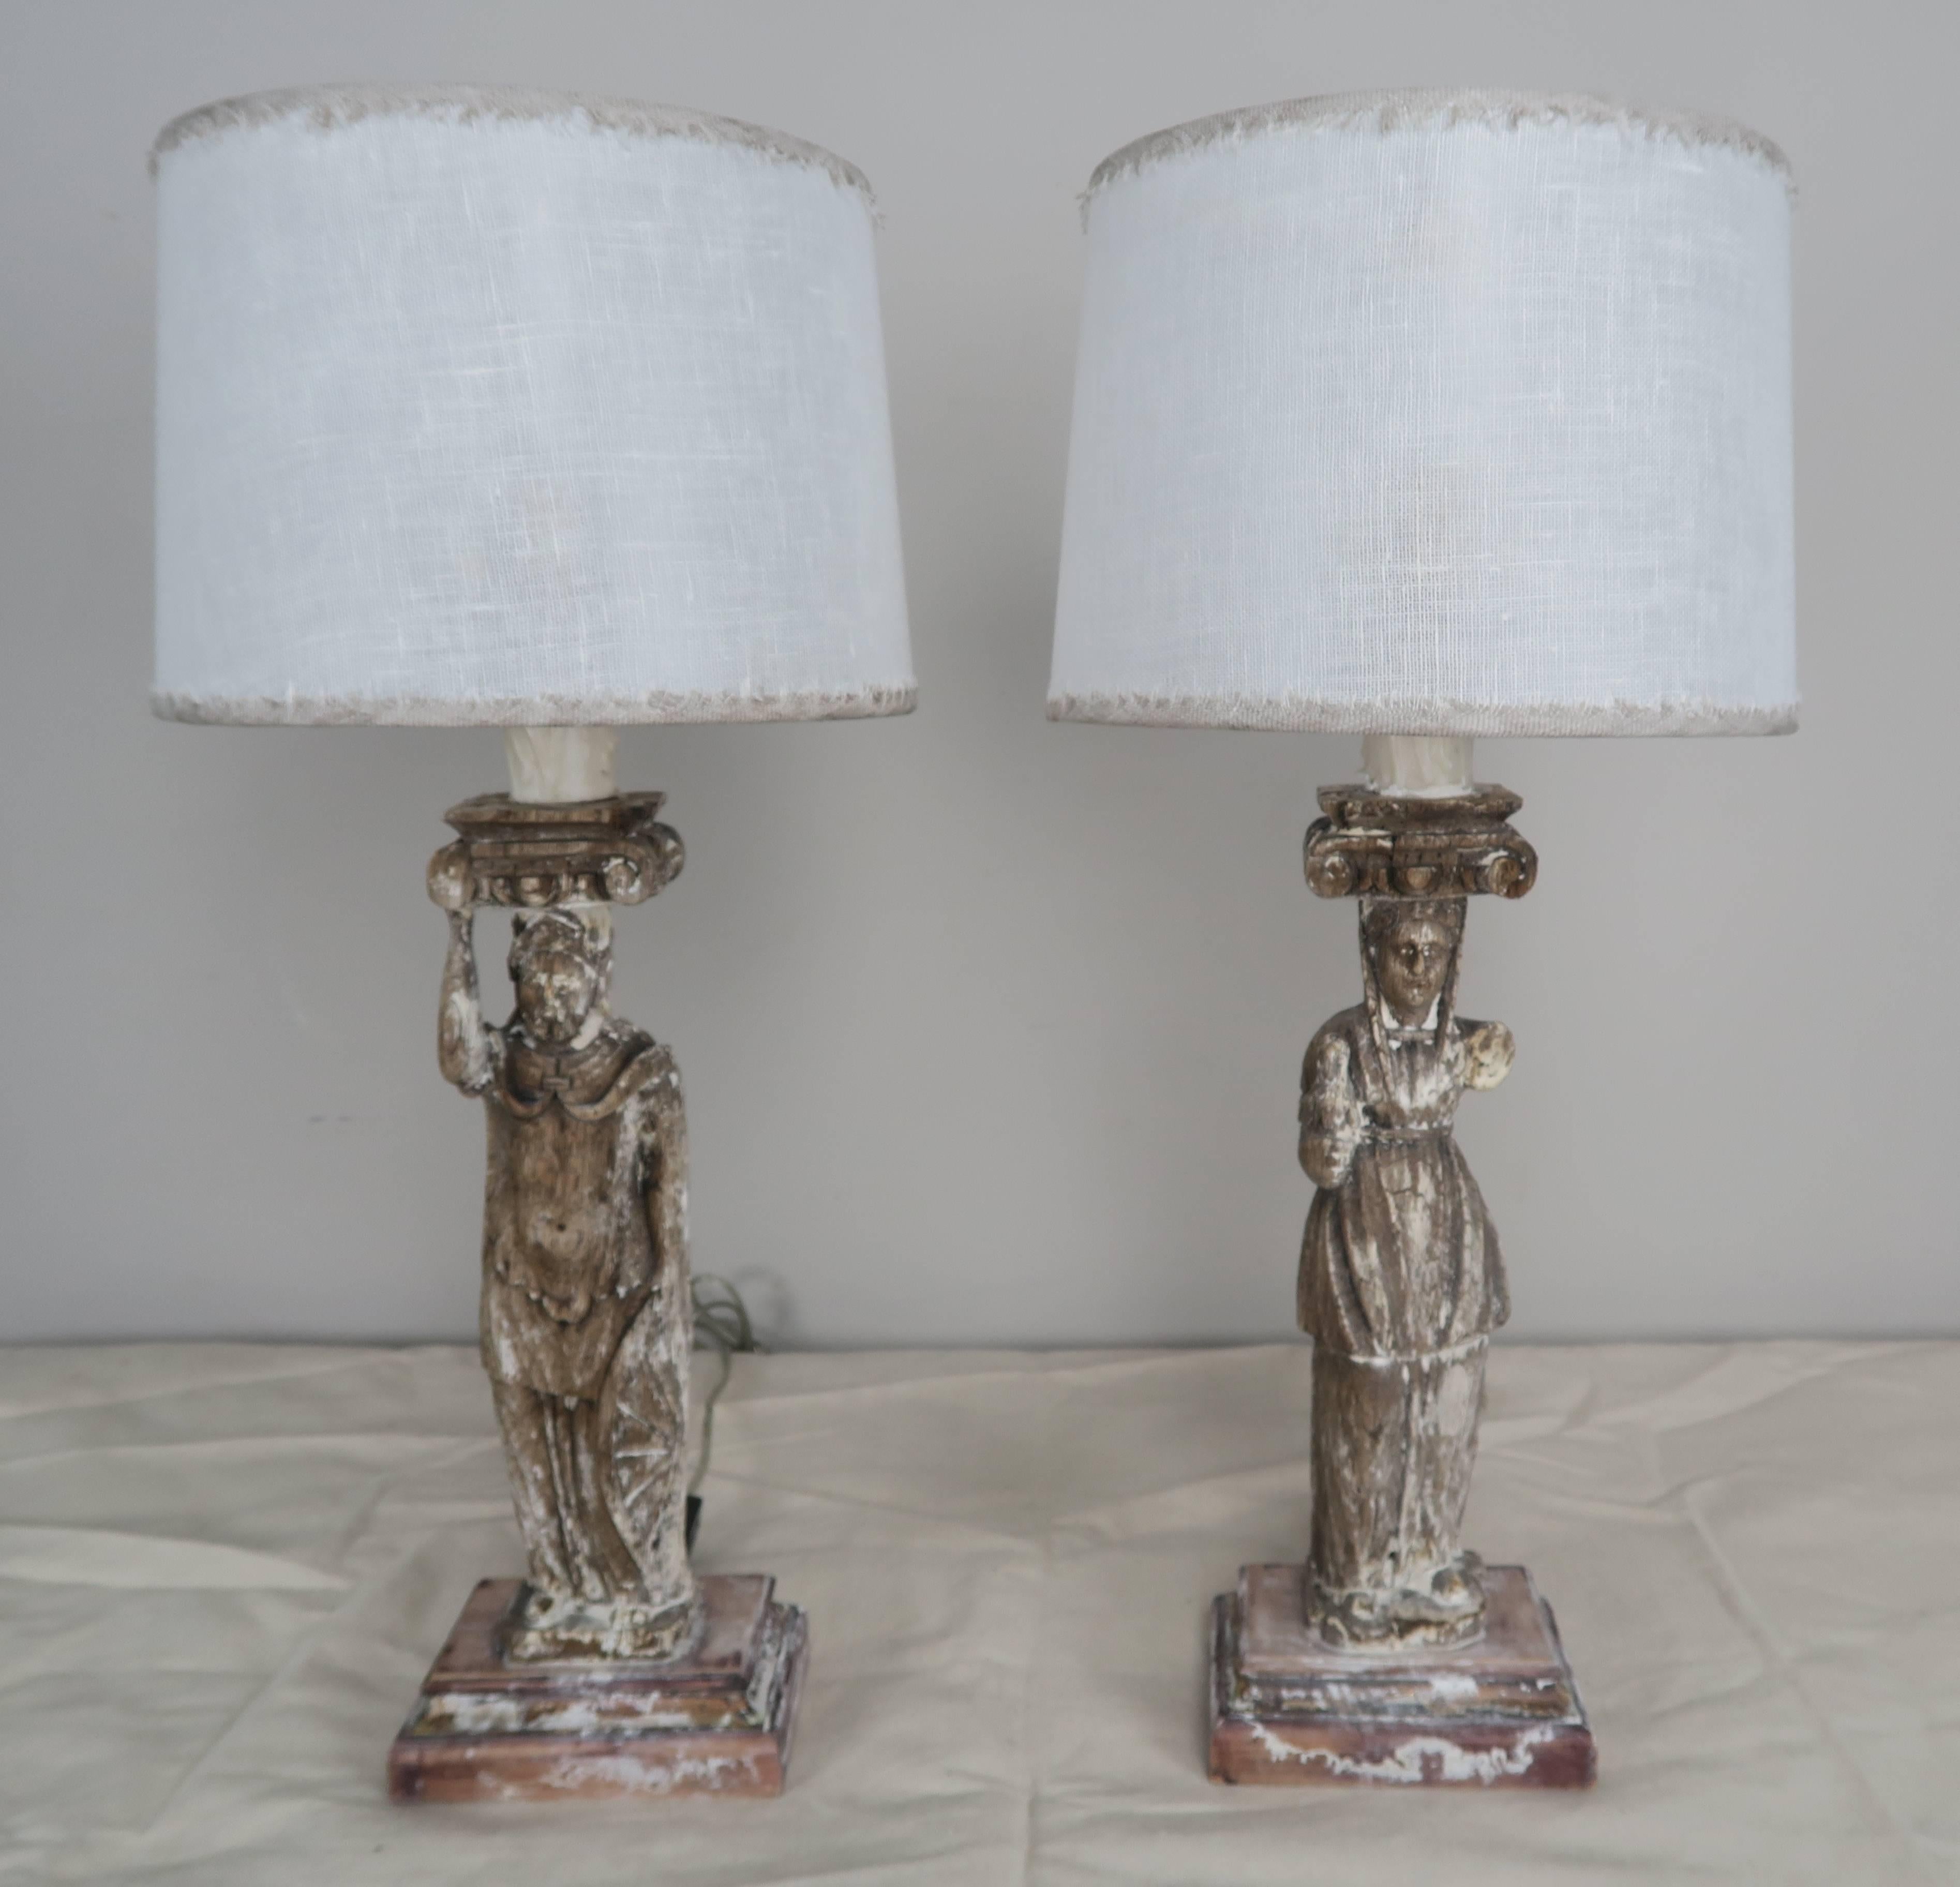 19th century neoclassical figures wired into lamps and crowned with custom linen shades. Newly wired with drip wax candle covers.